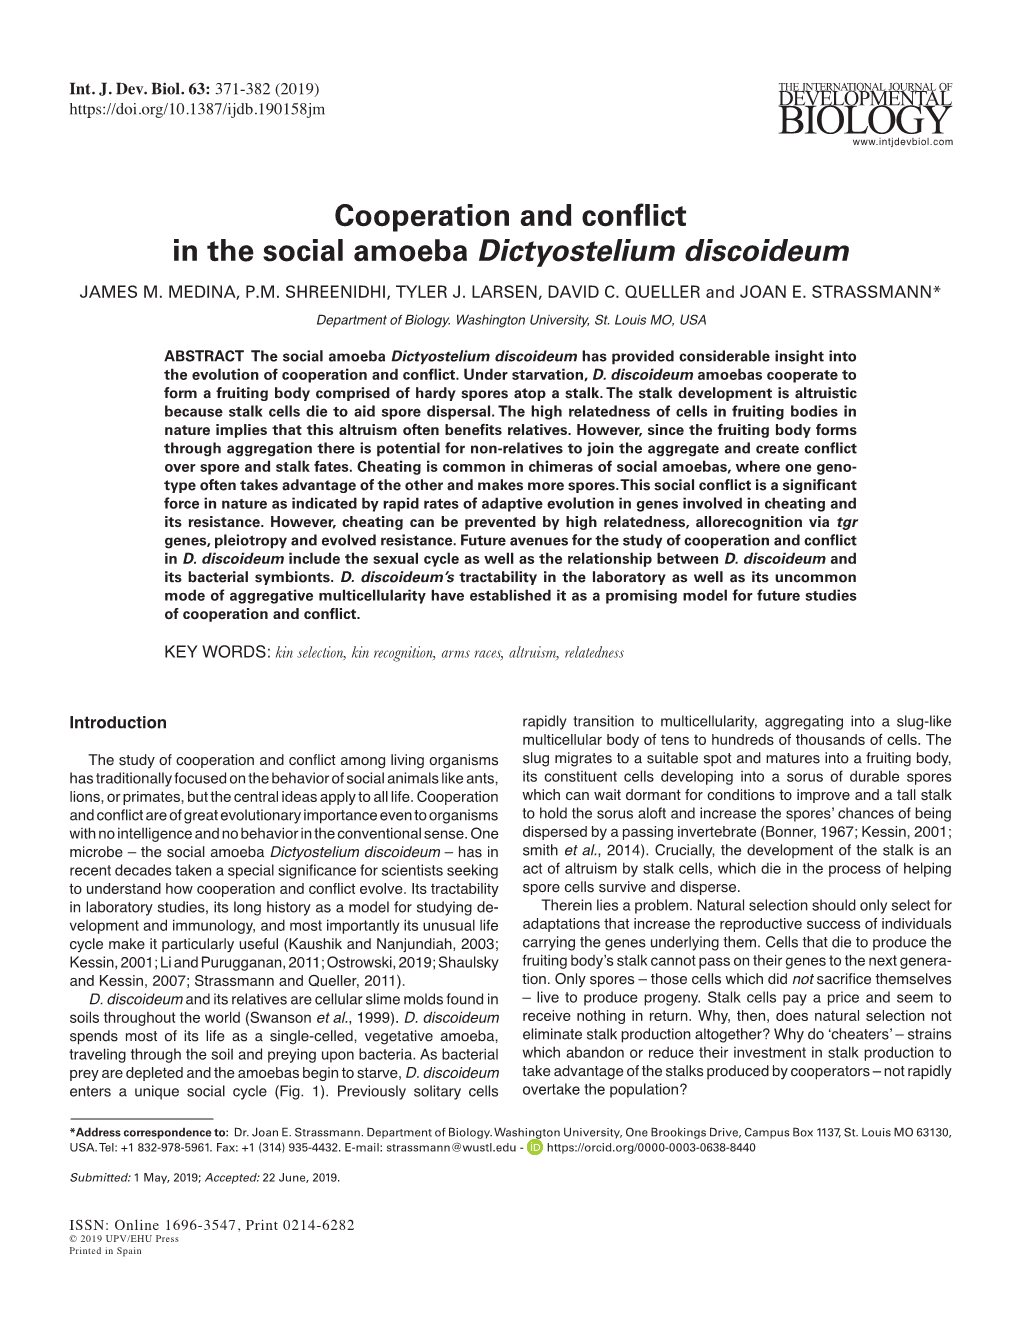 Cooperation and Conflict in the Social Amoeba Dictyostelium Discoideum JAMES M